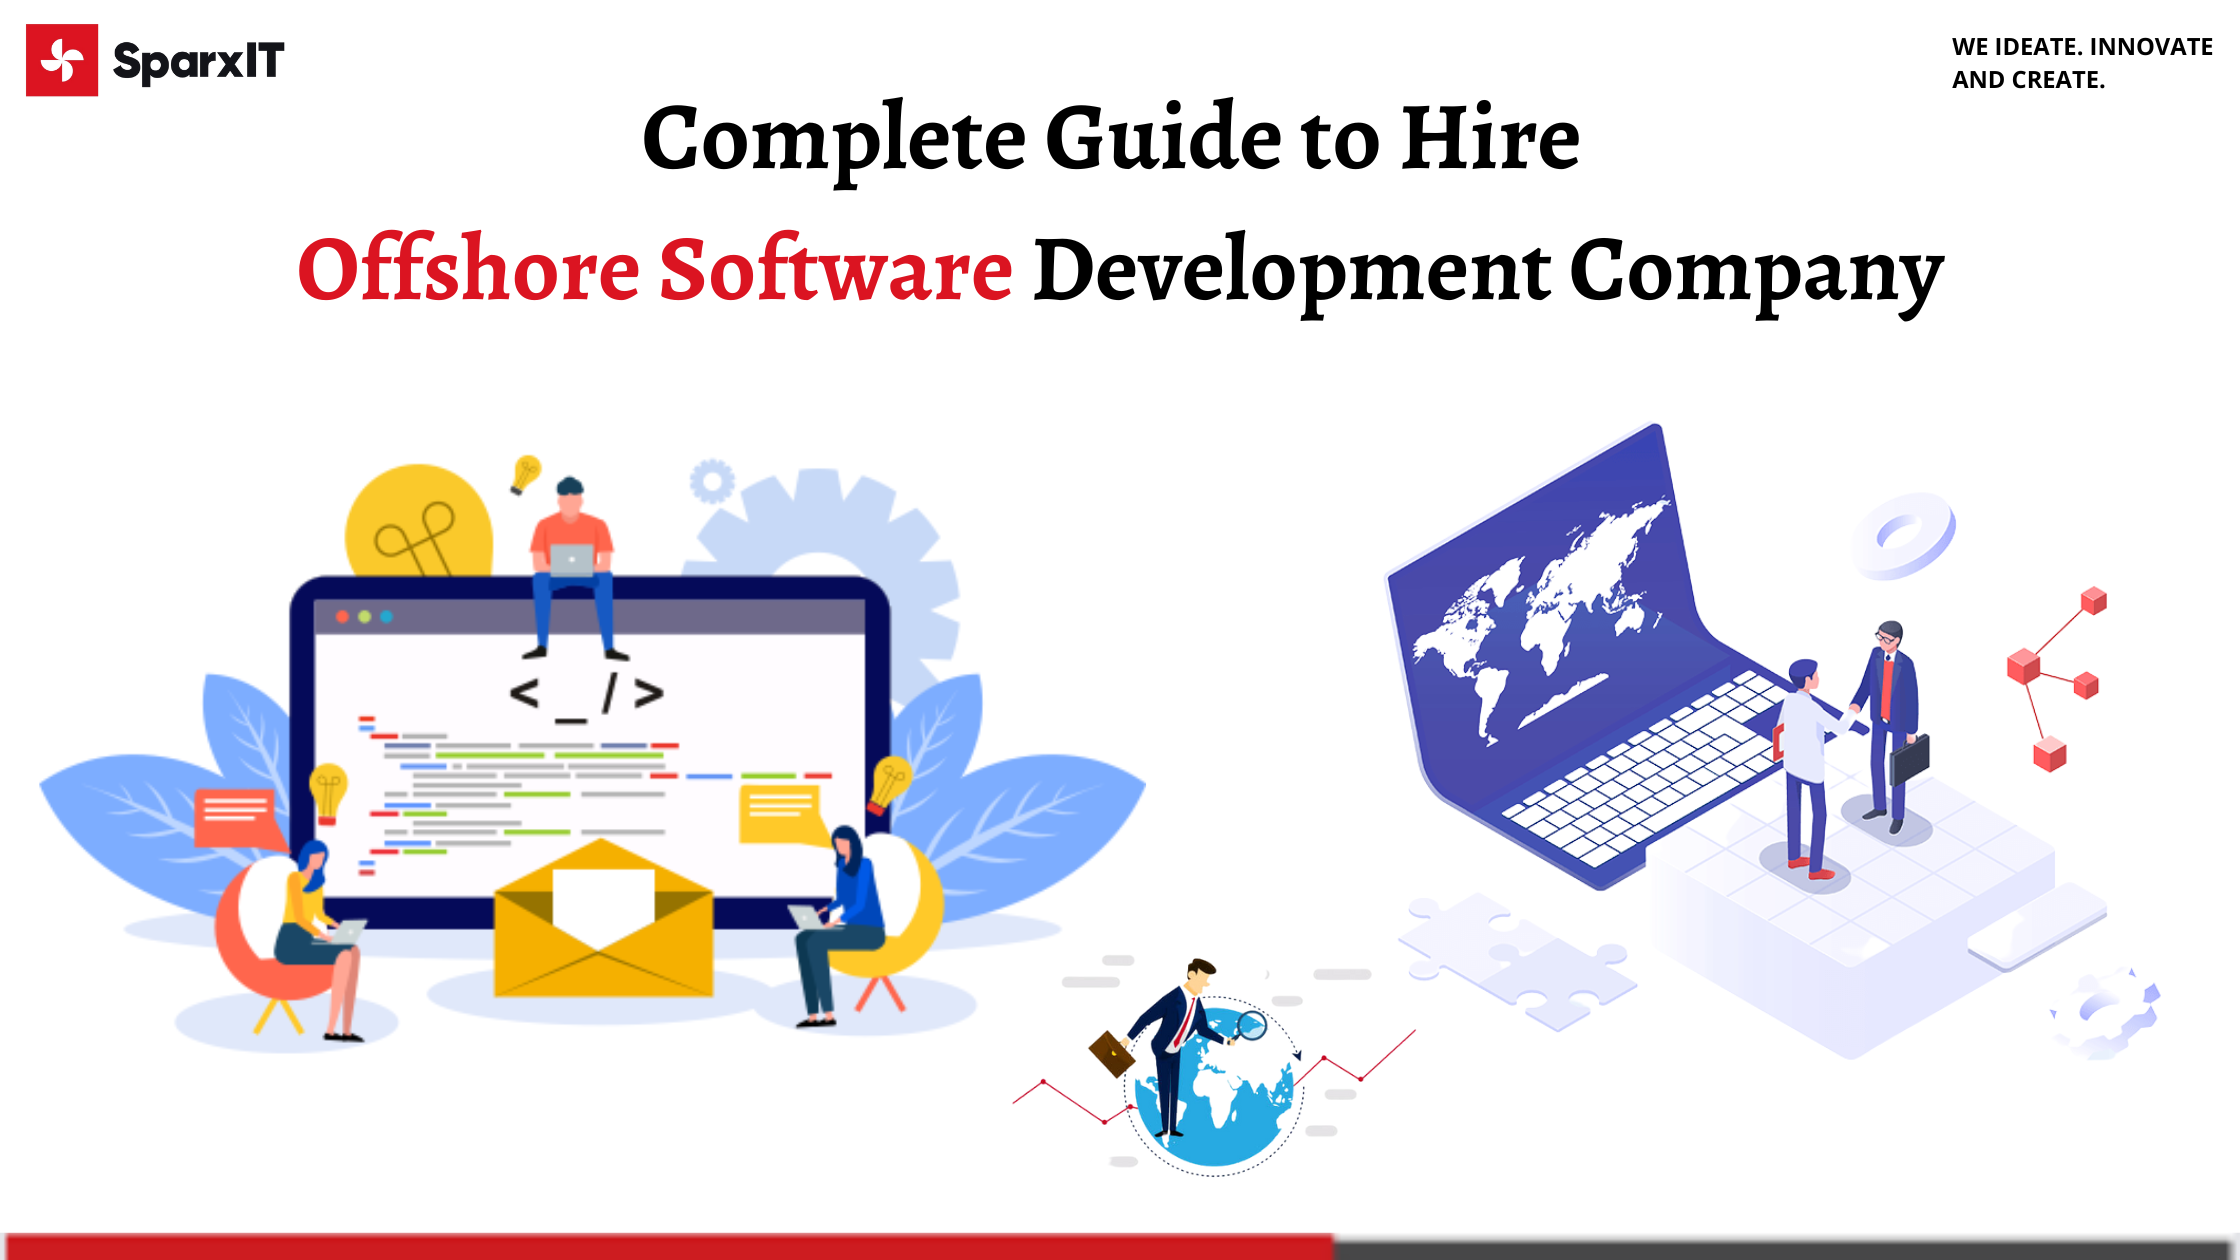 Complete Guide to Hire Offshore Software Development Company